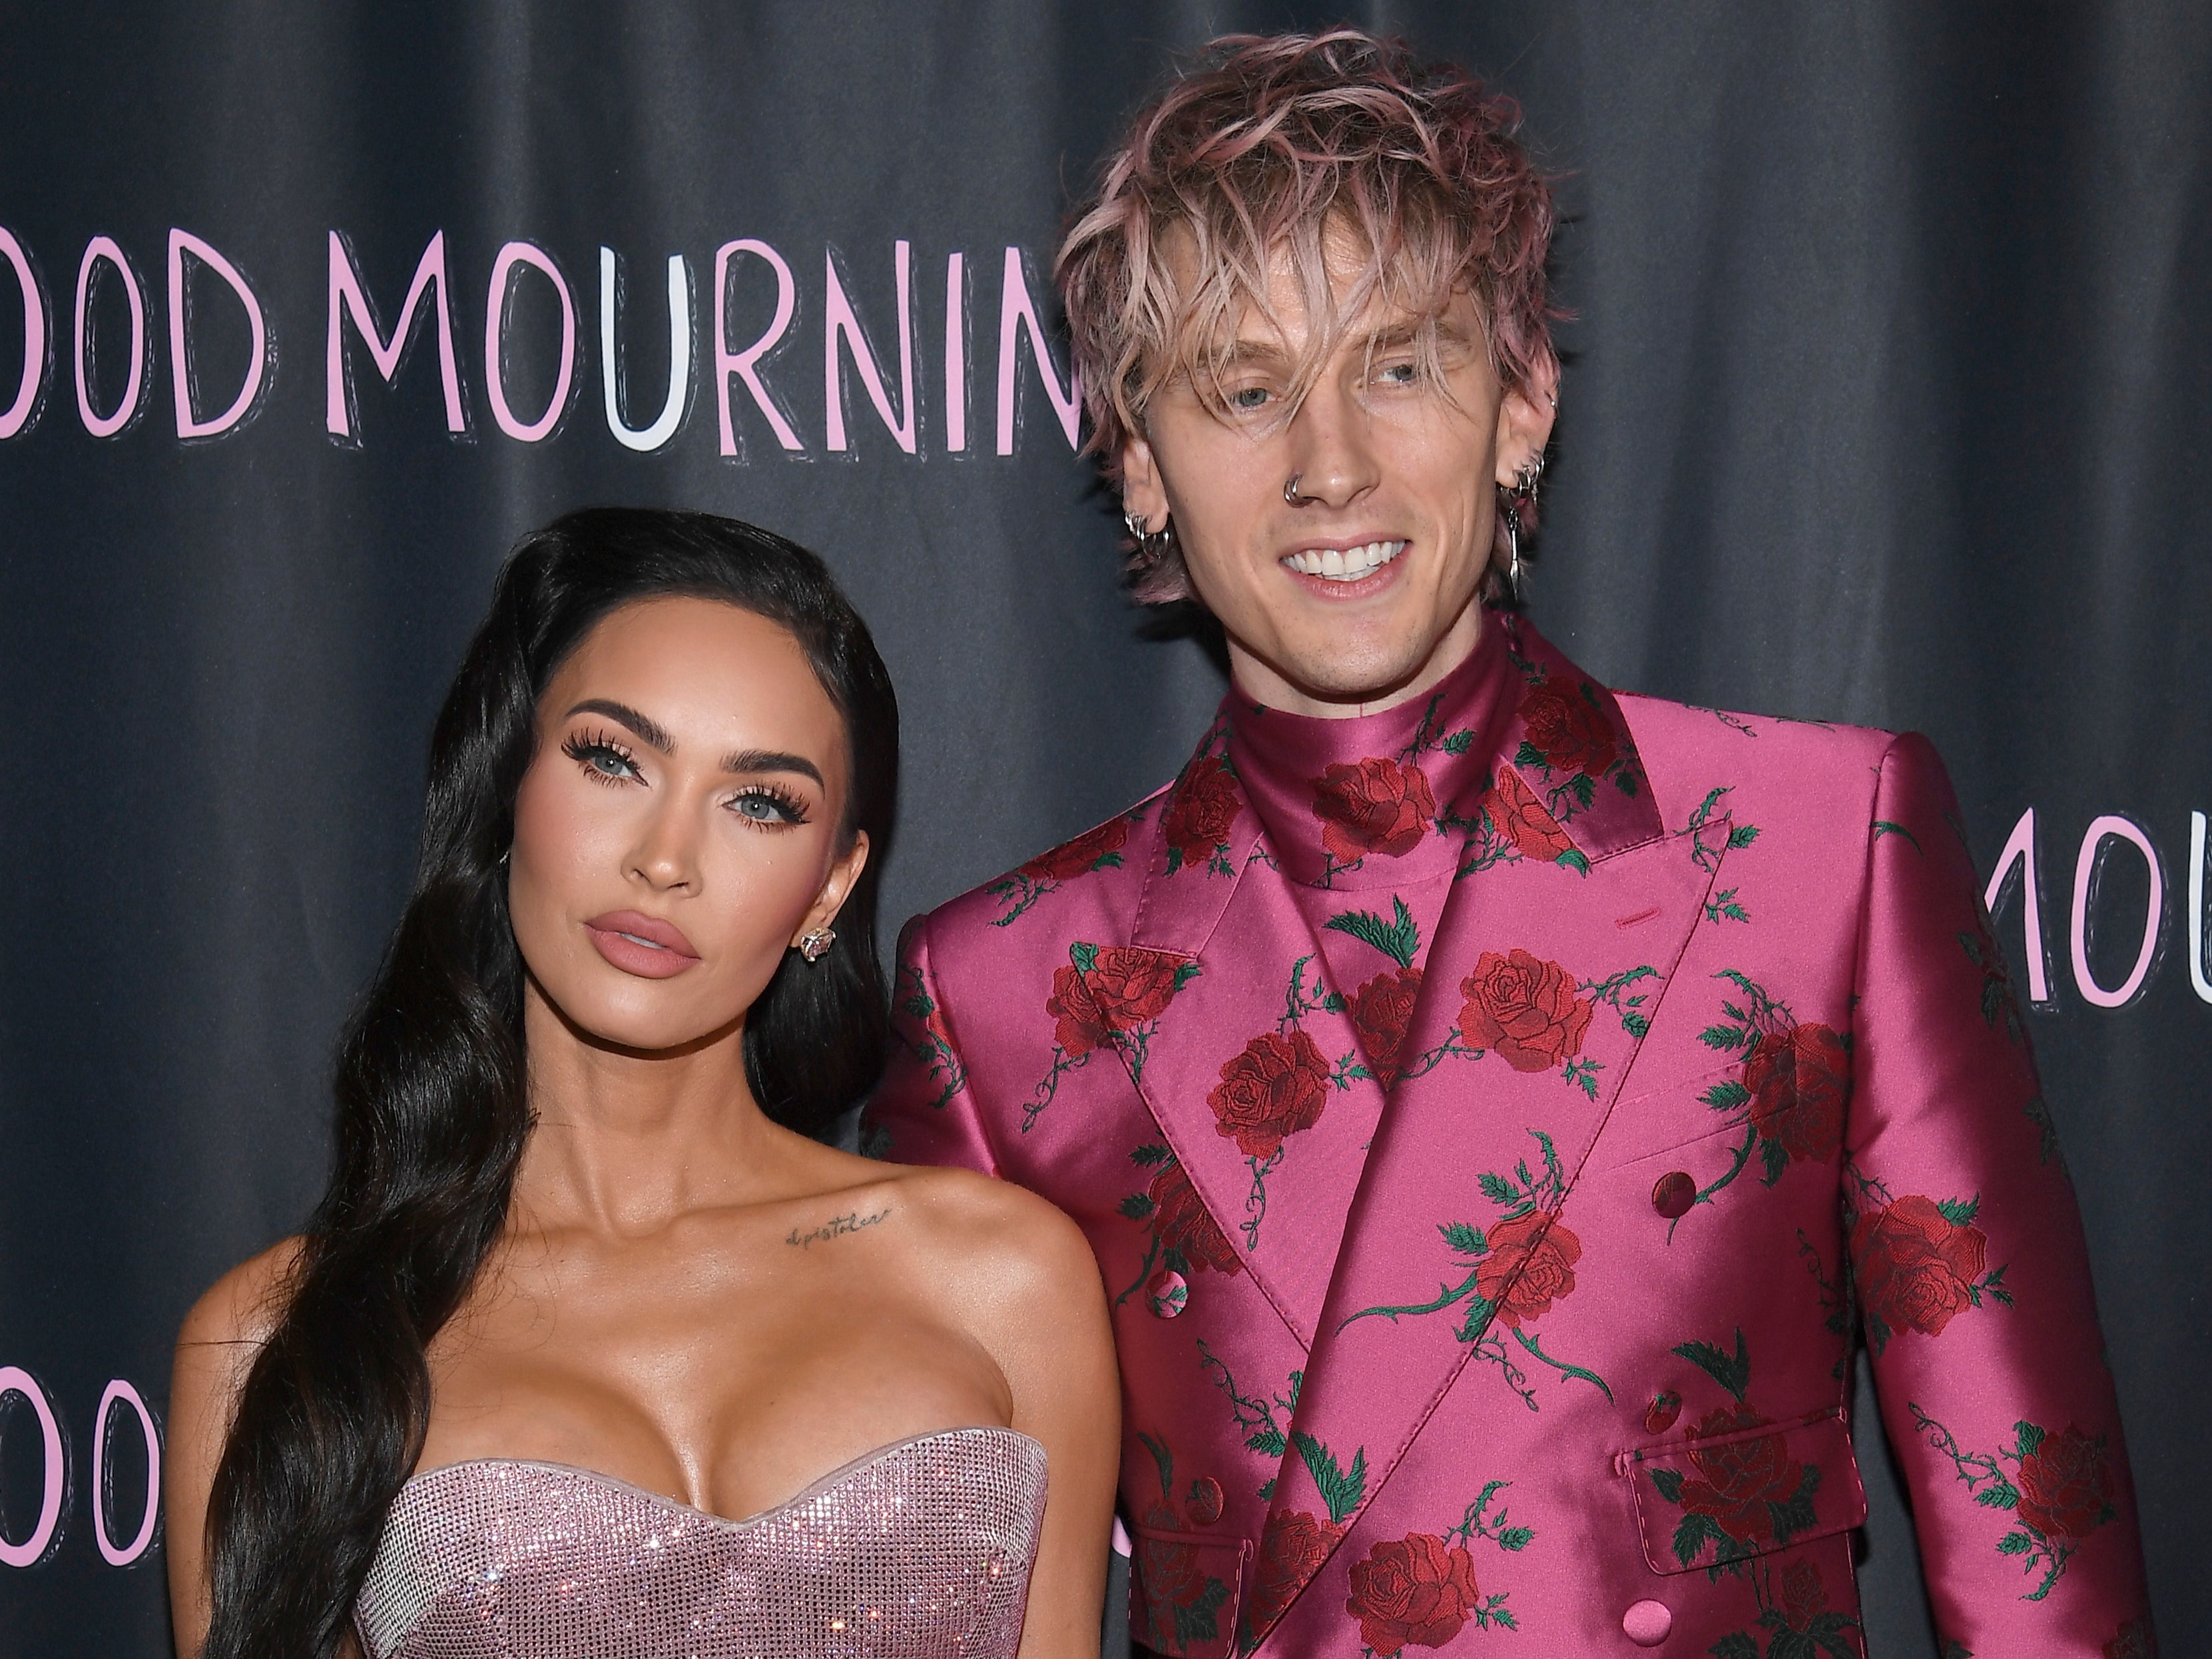 Megan Fox and Machine Gun Kelly attend the World Premiere of "Good Mourning" at The London West Hollywood at Beverly Hills on May 12, 2022